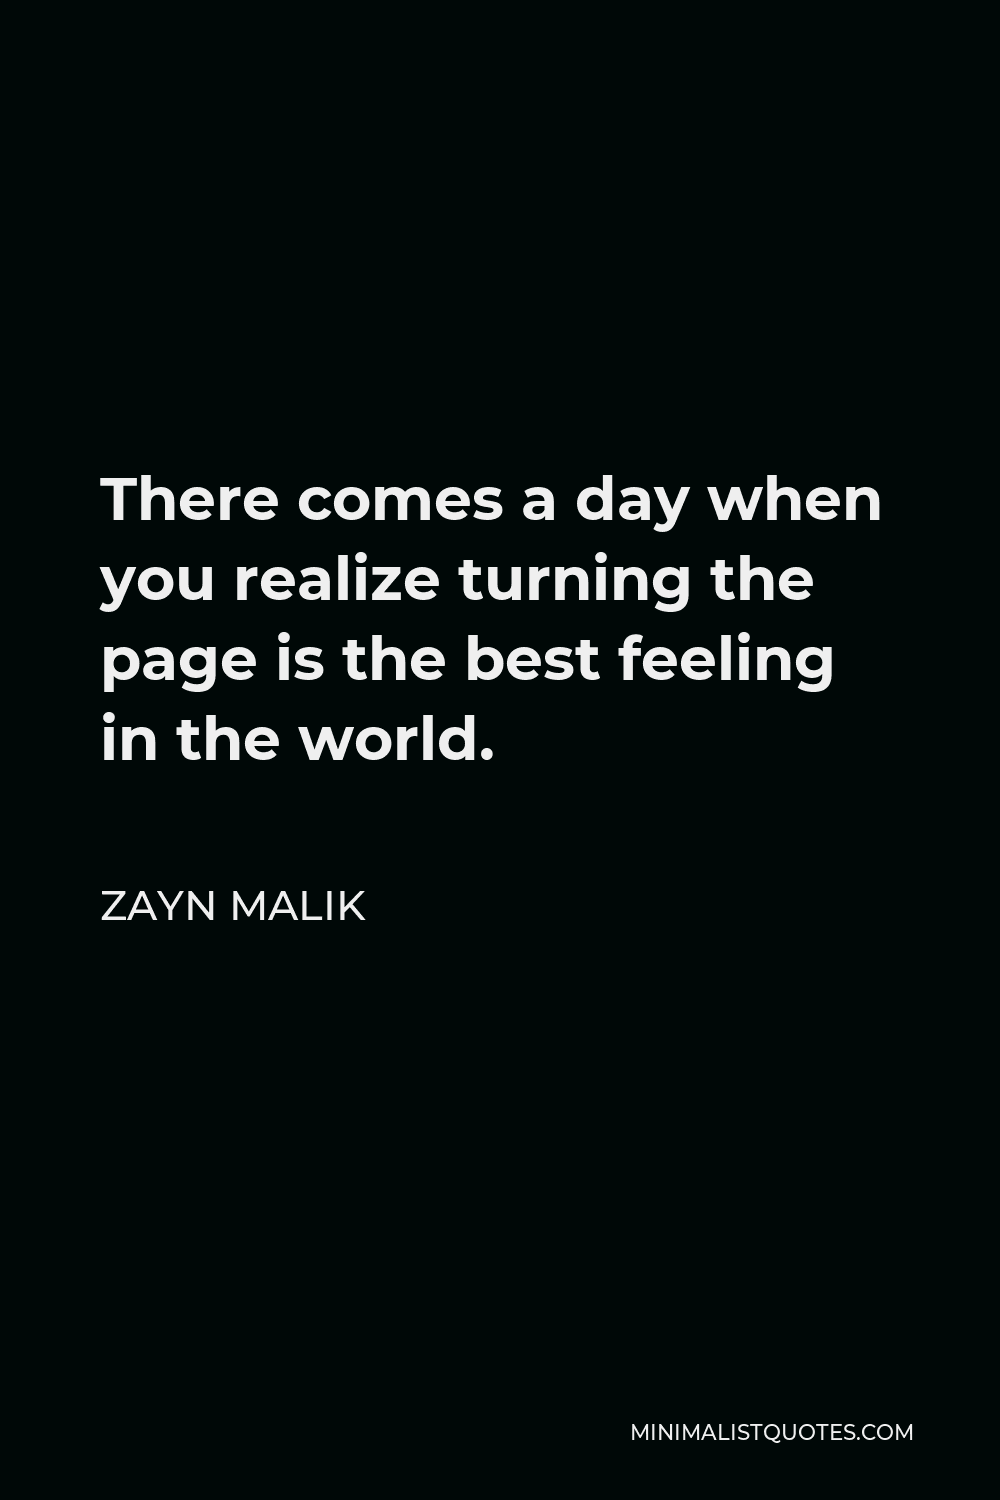 Zayn Malik Quote - There comes a day when you realize turning the page is the best feeling in the world.